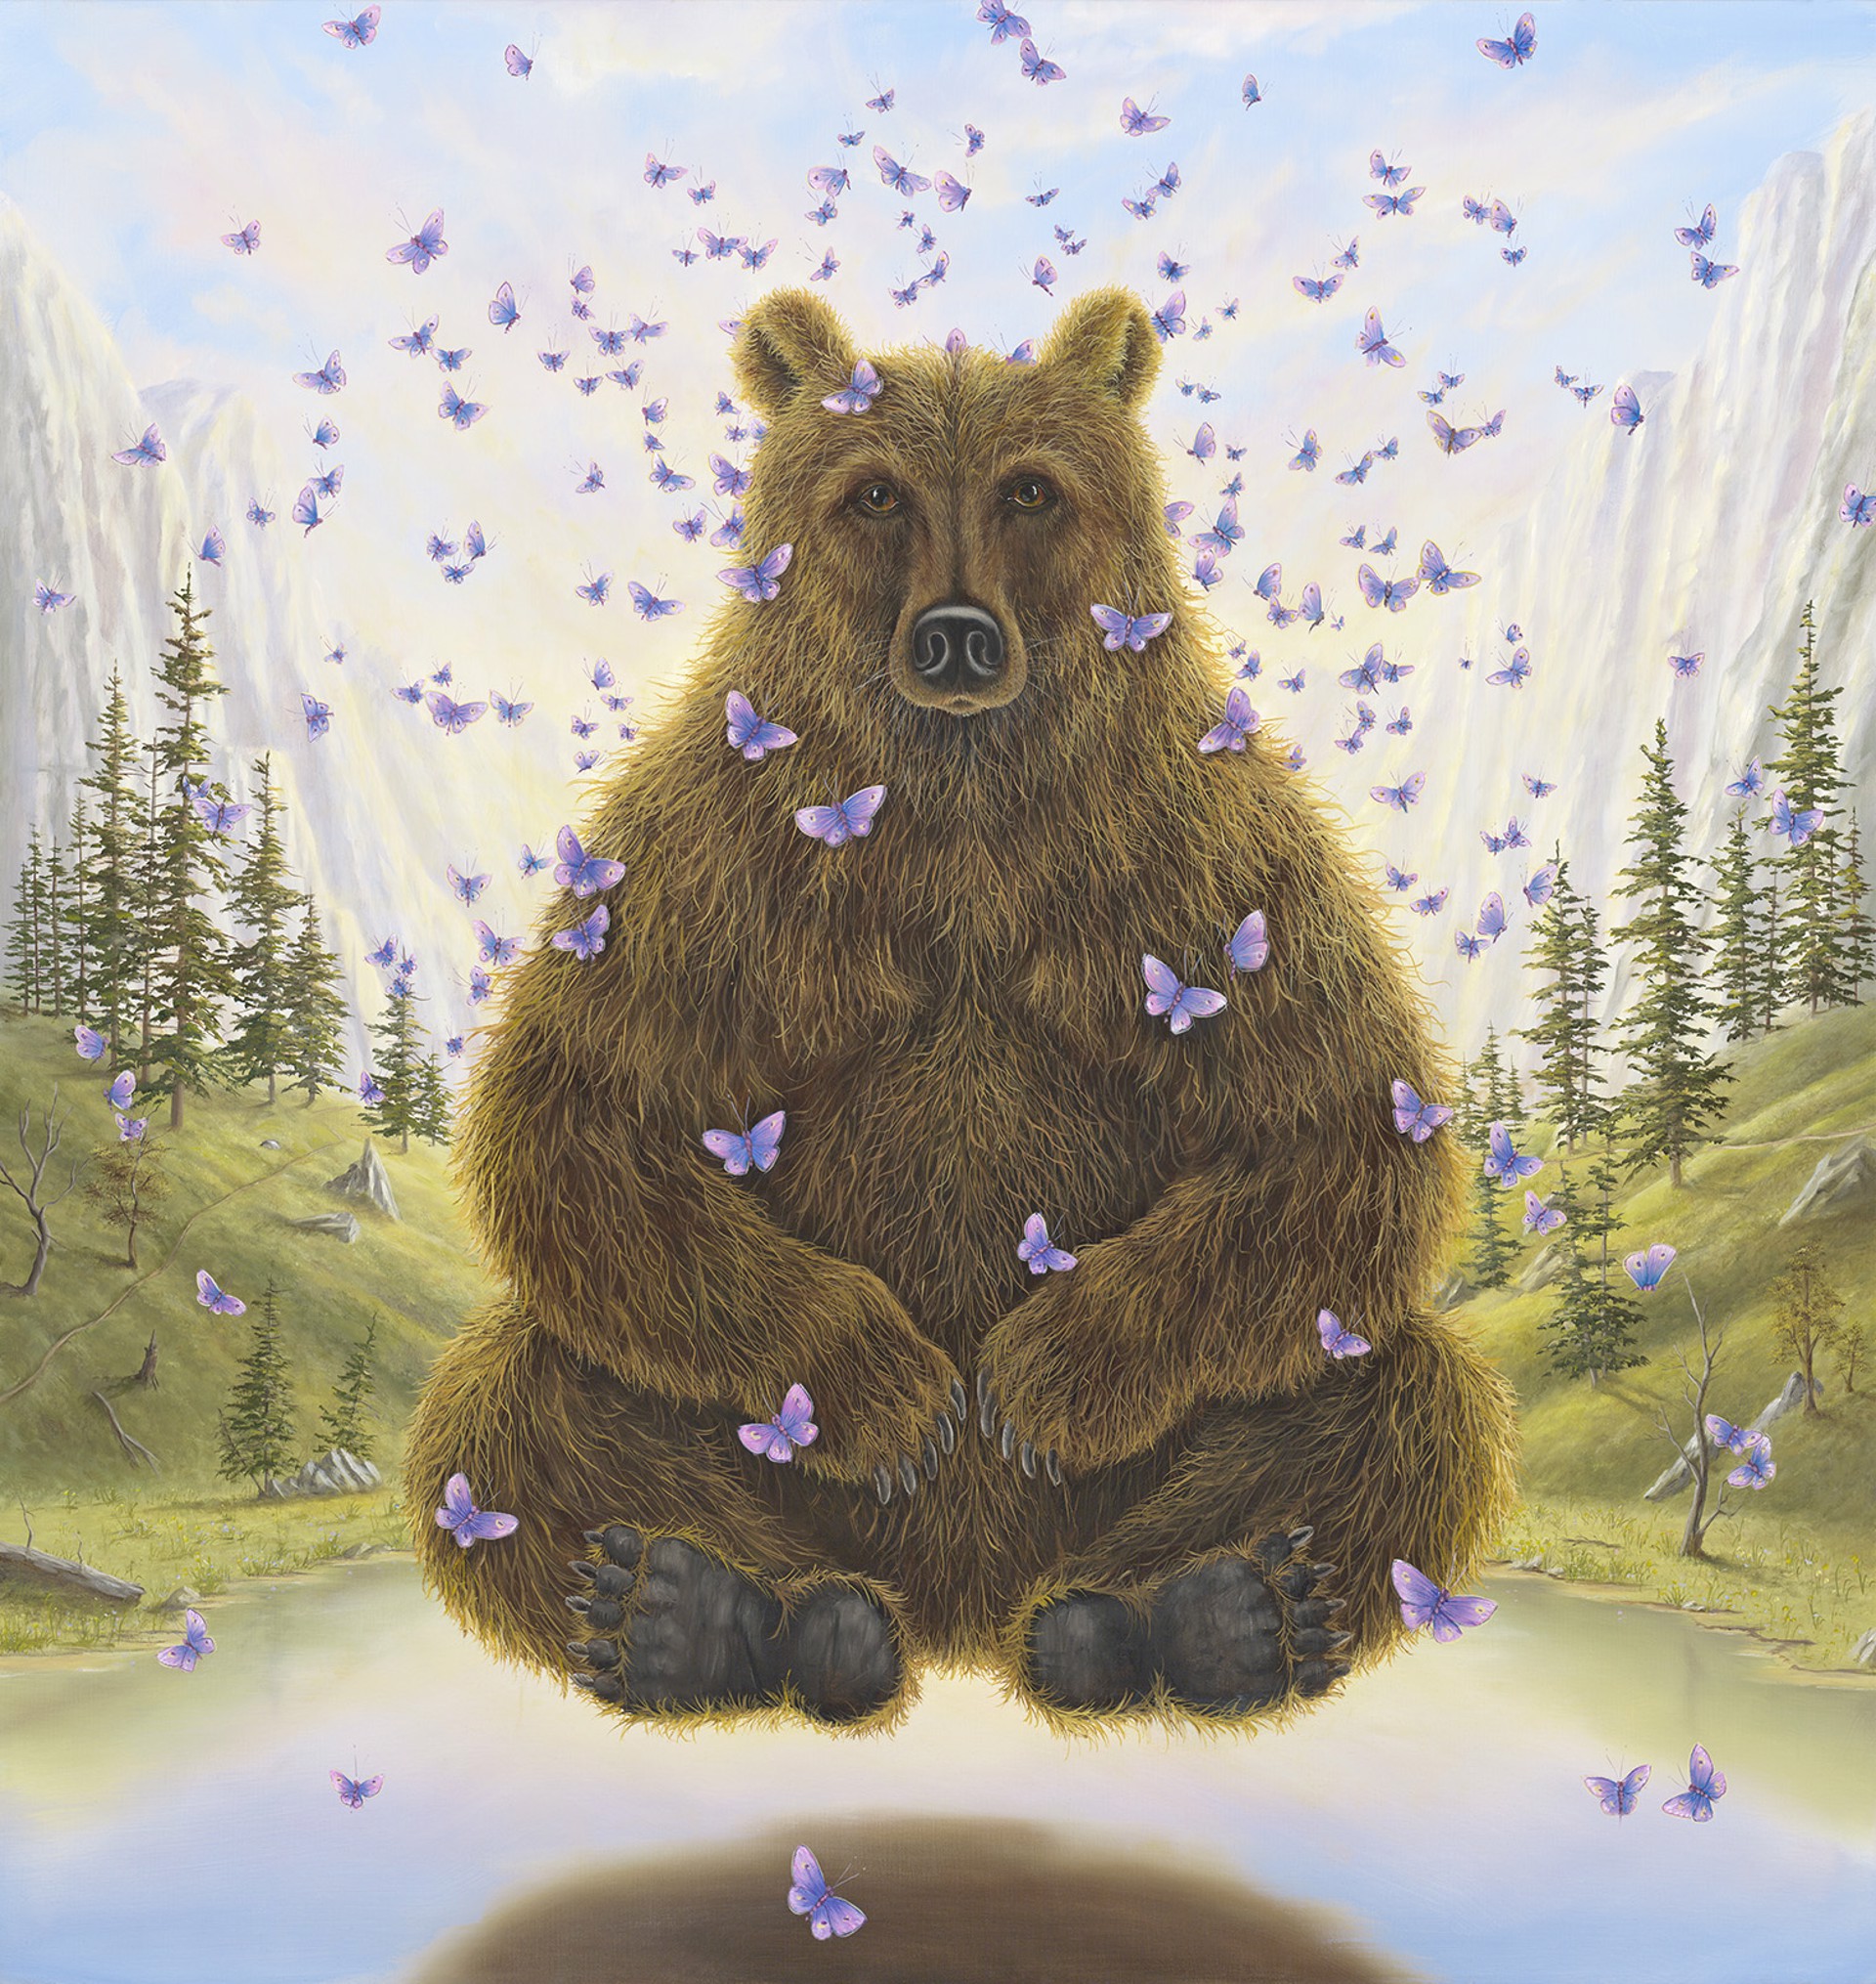 The Yogi by Robert Bissell